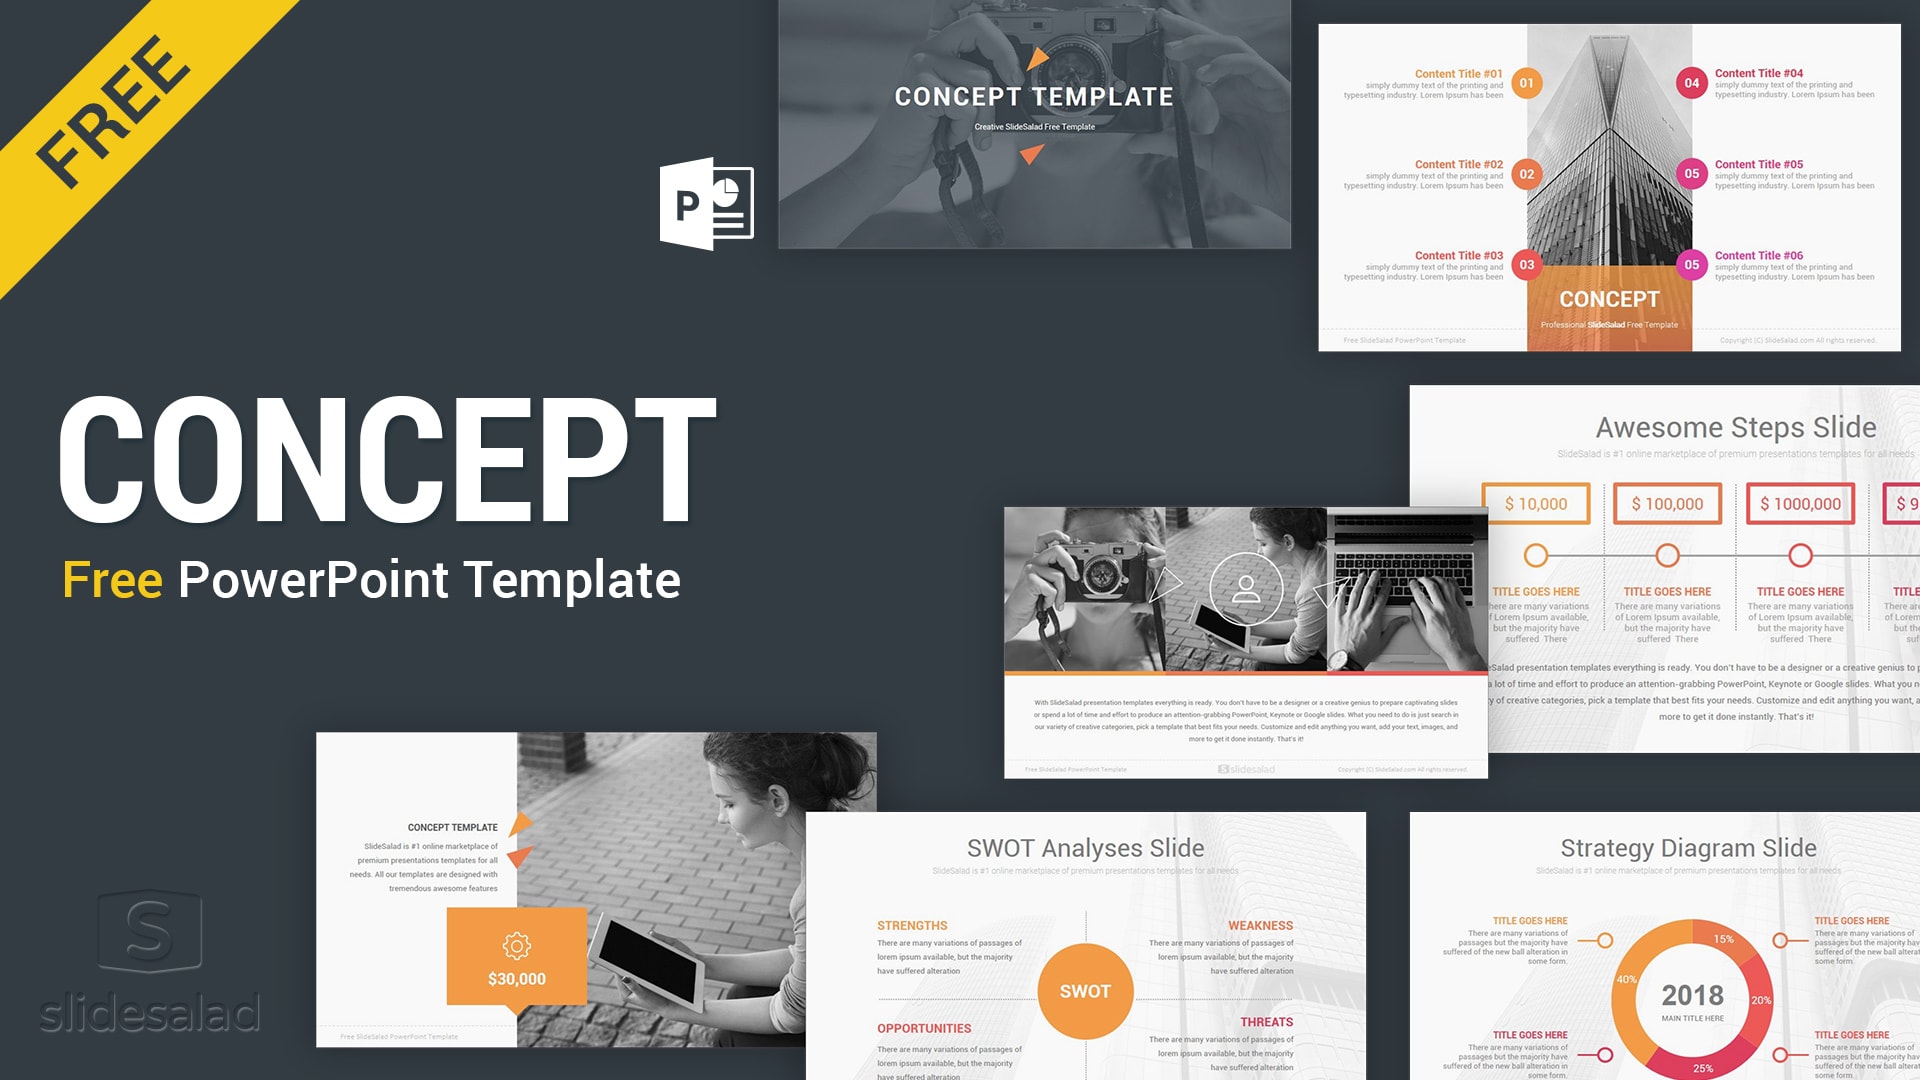 Powerpoint free template 20 Best